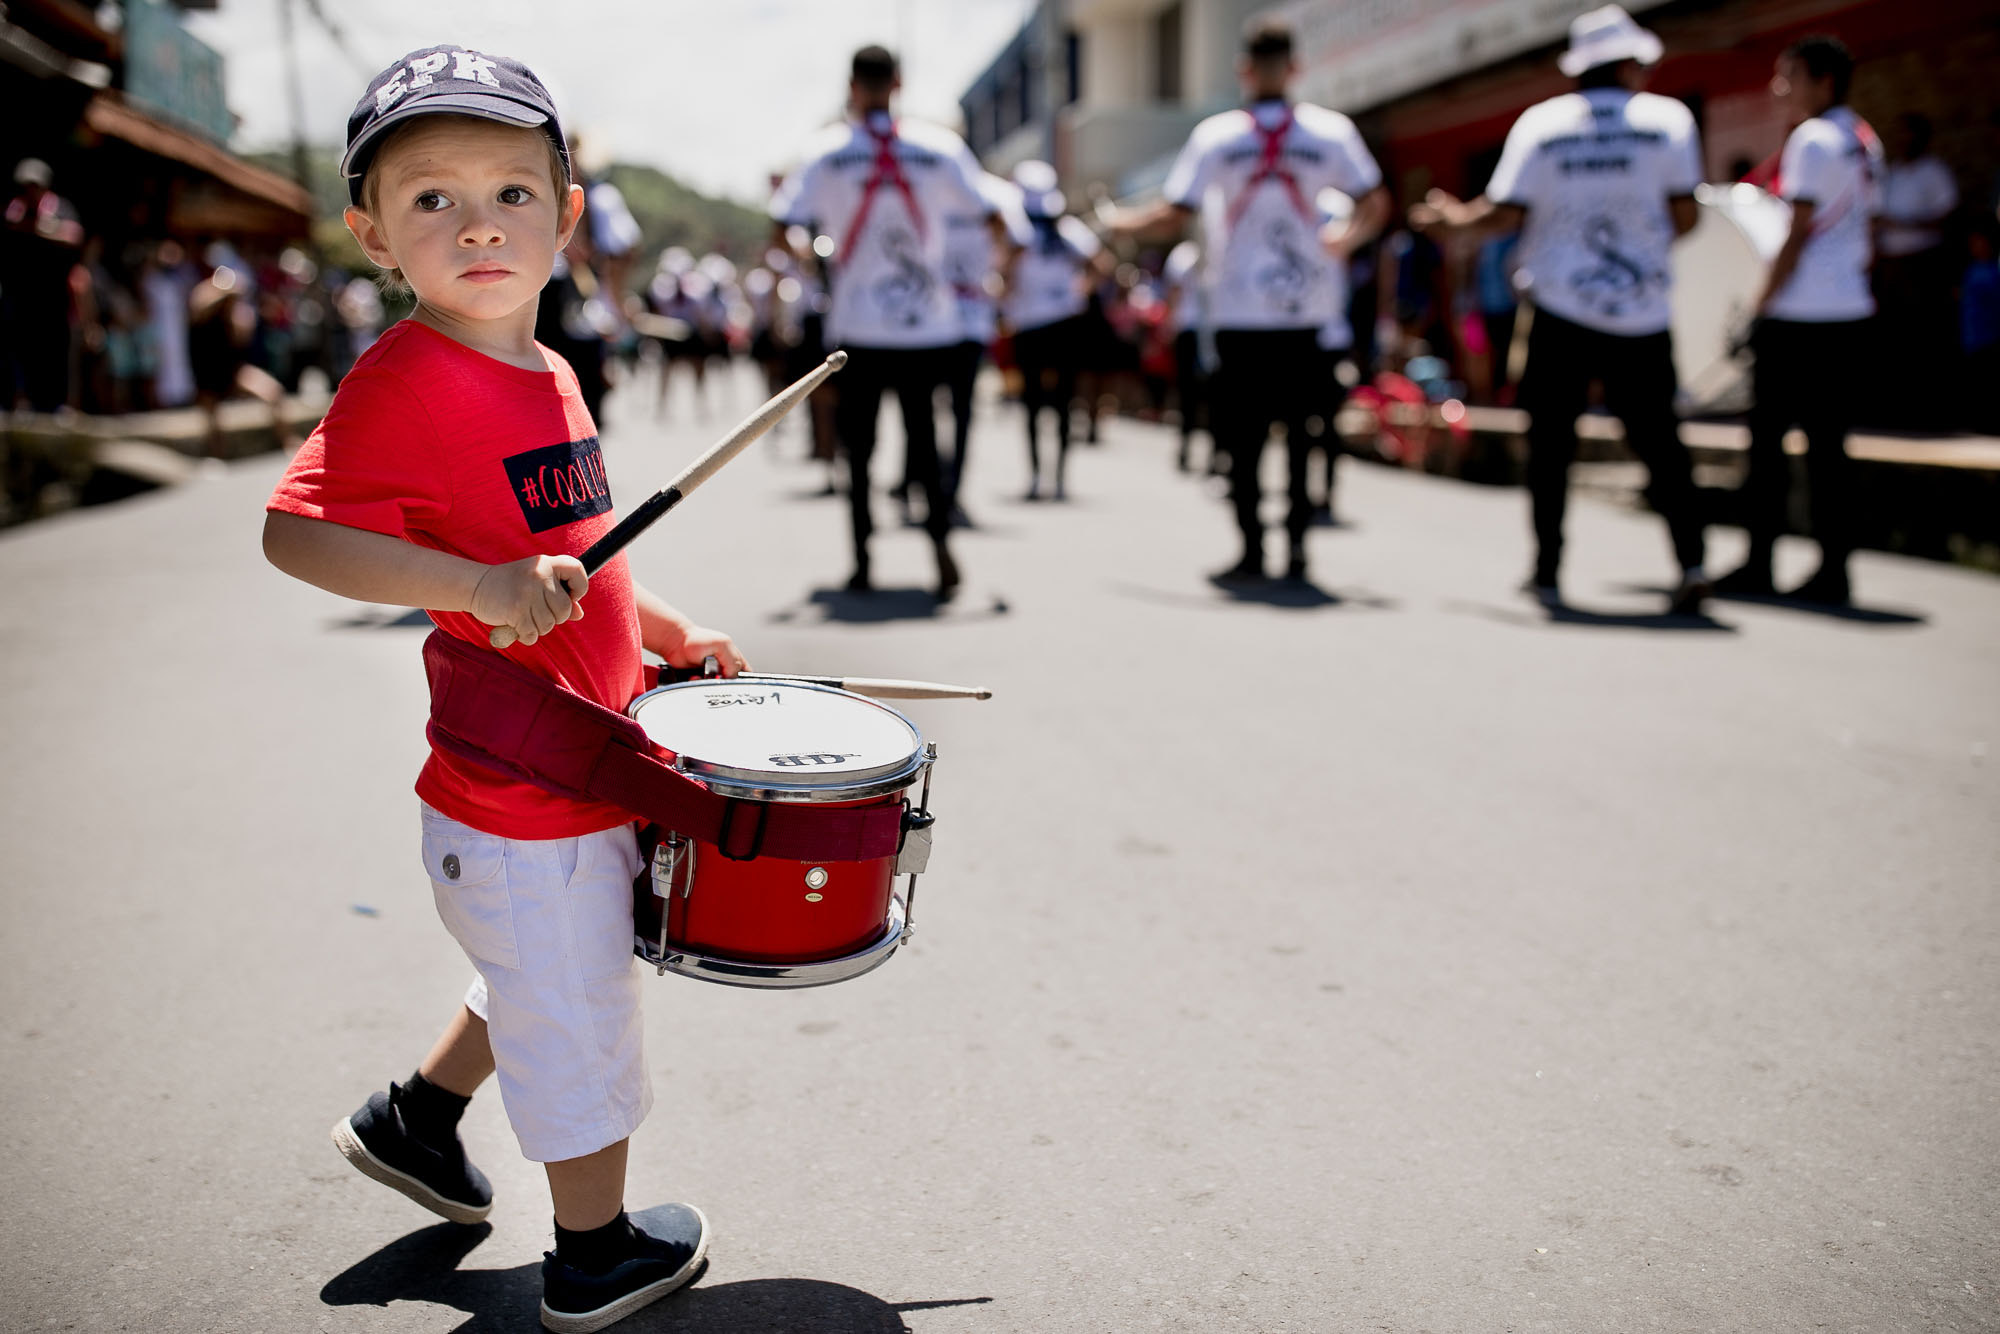 The little drummer boy who wants to be part of the band